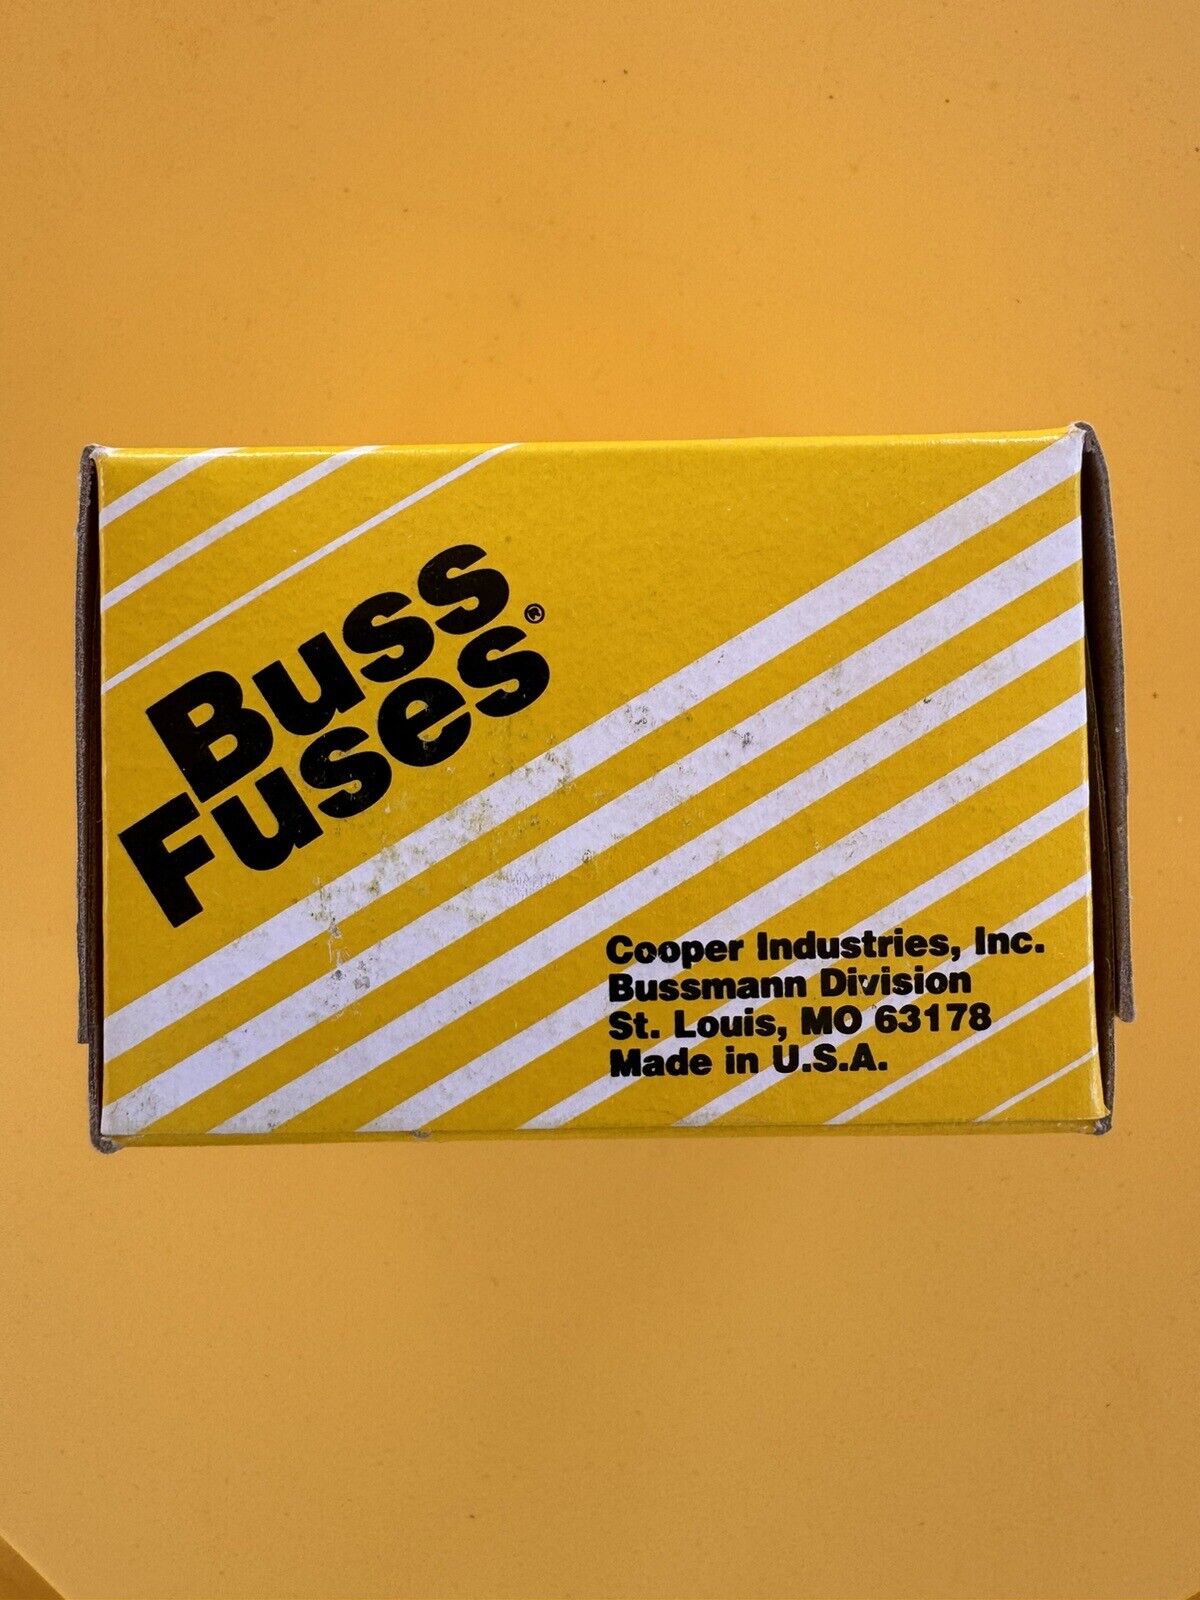 New Buss Fusetron Fuses MDL 2 Box of 100 Pieces